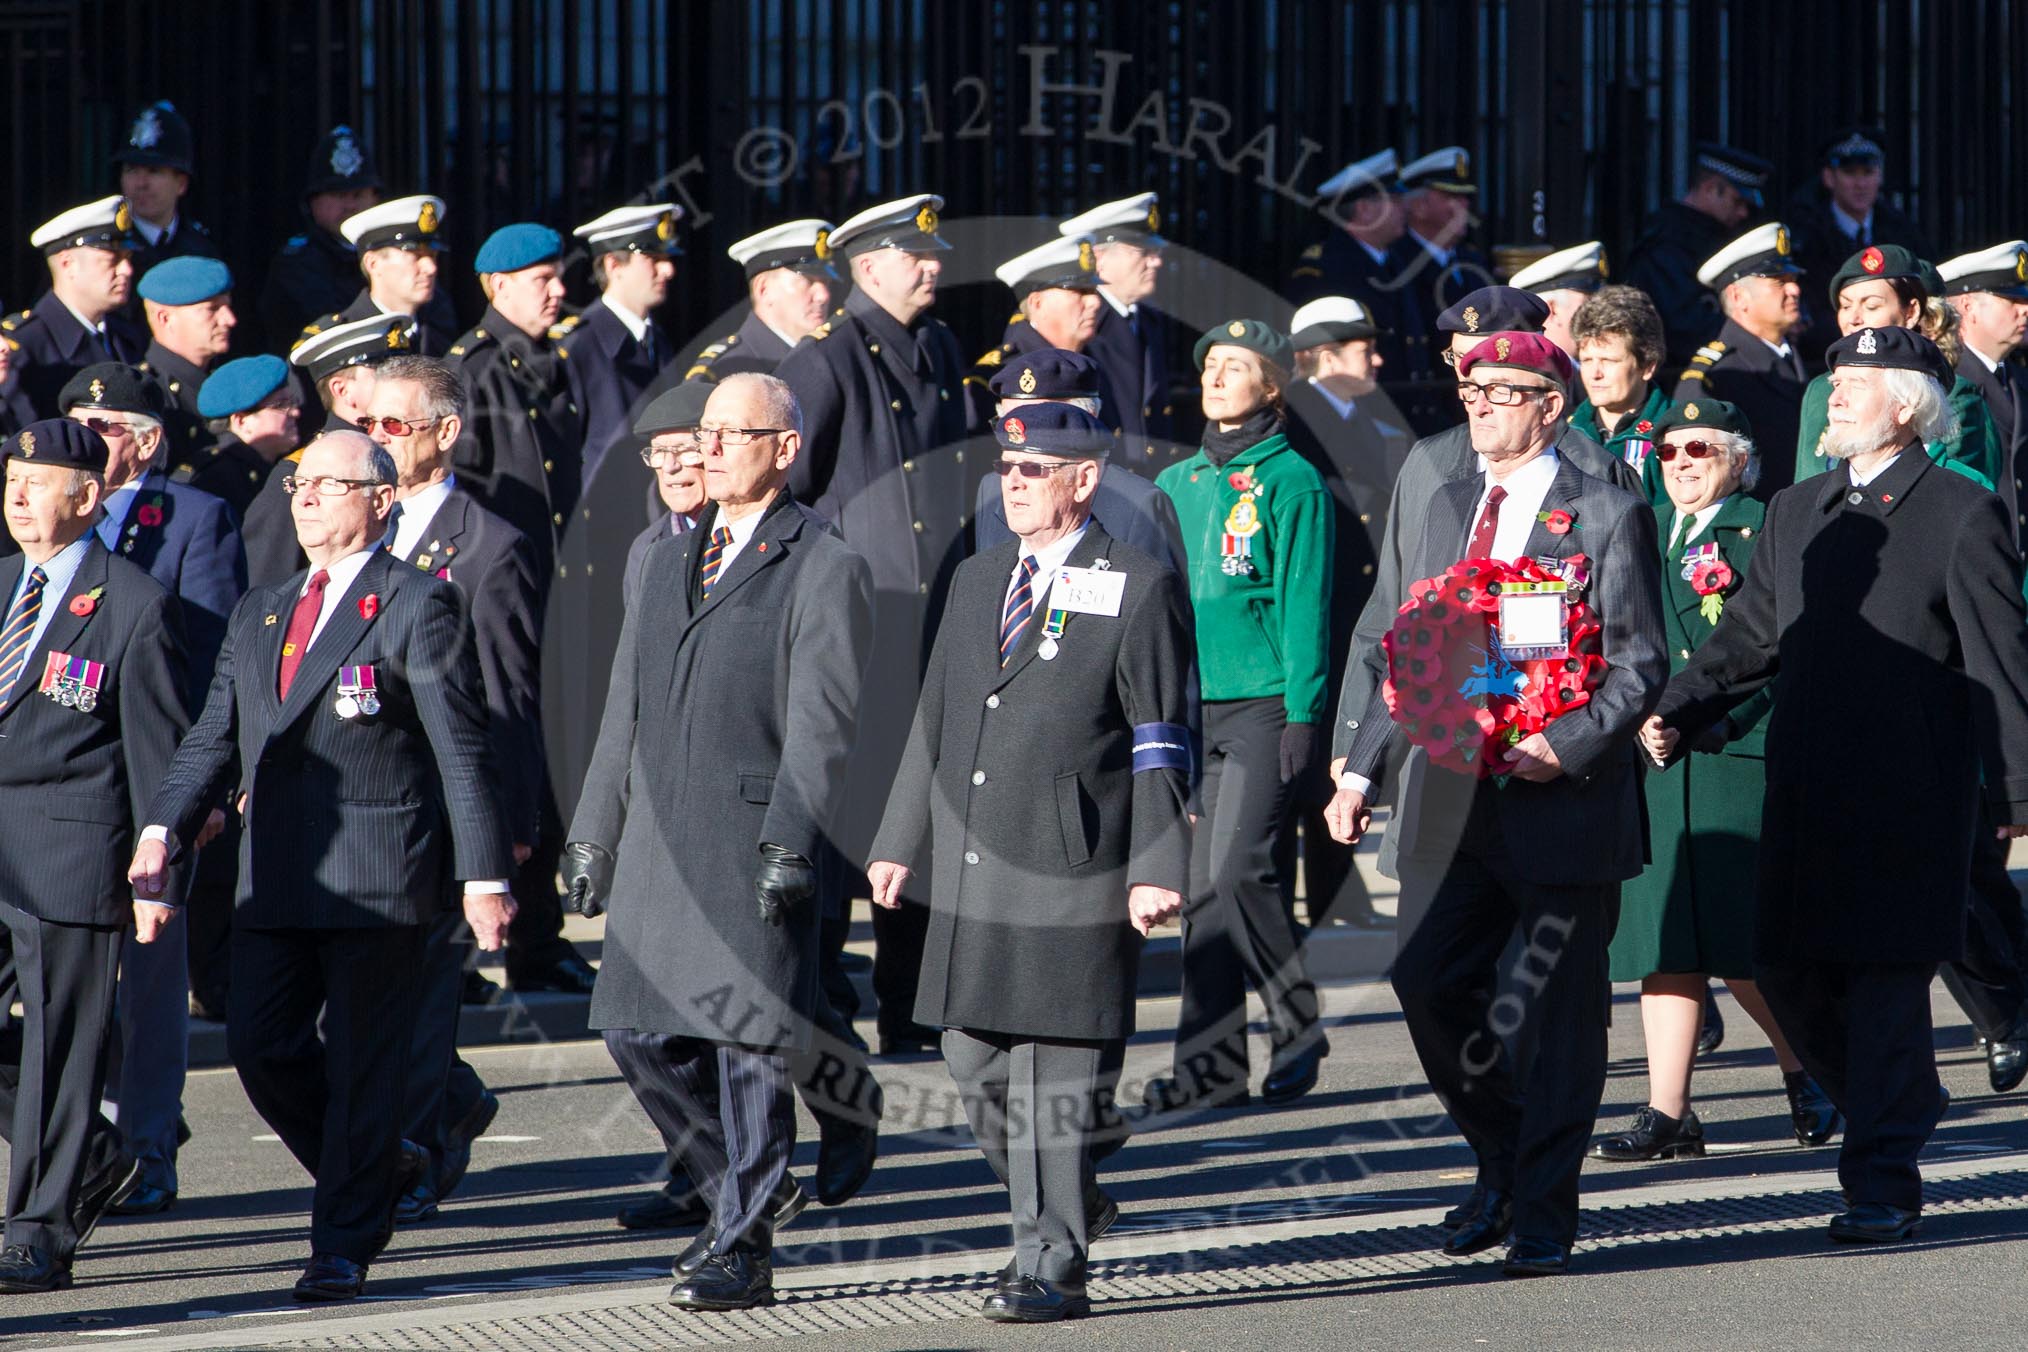 Remembrance Sunday 2012 Cenotaph March Past: Group B20 - Arborfield Old Boys Association, and B21 - Women's Royal Army Corps Association..
Whitehall, Cenotaph,
London SW1,

United Kingdom,
on 11 November 2012 at 11:57, image #937